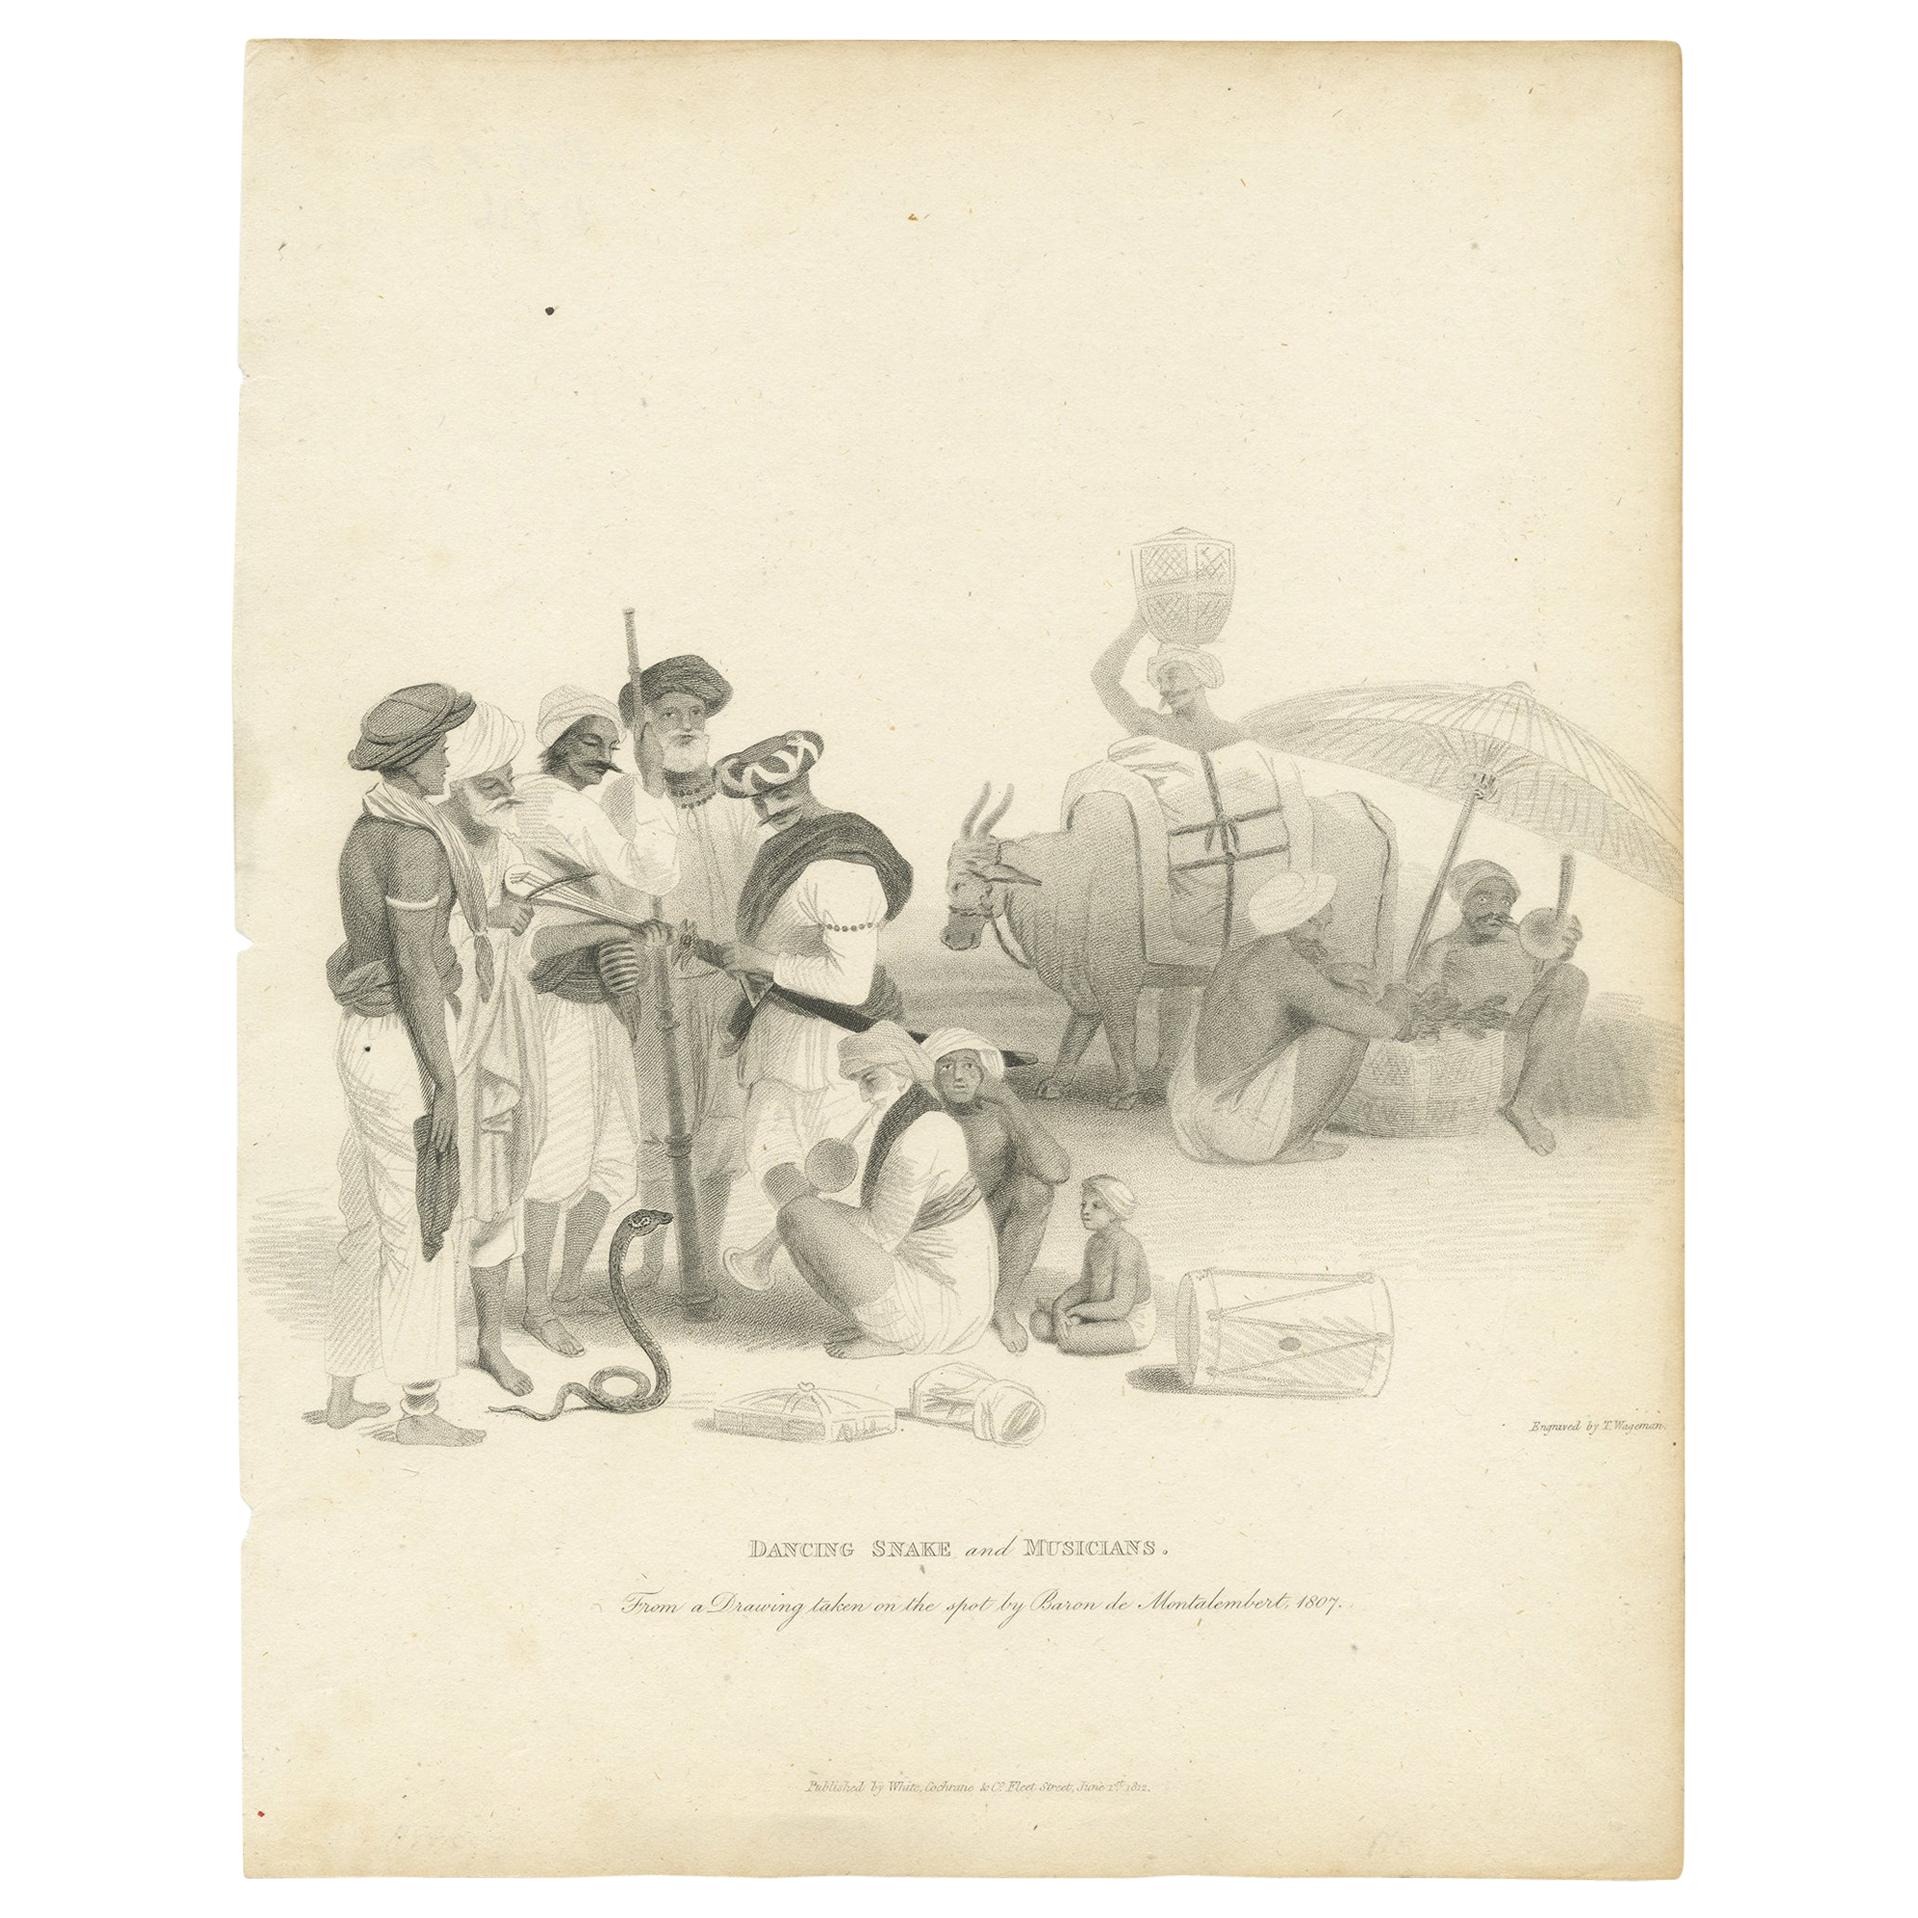 Antique Print of a Snake Charmer and Musicians by Wageman, 1812